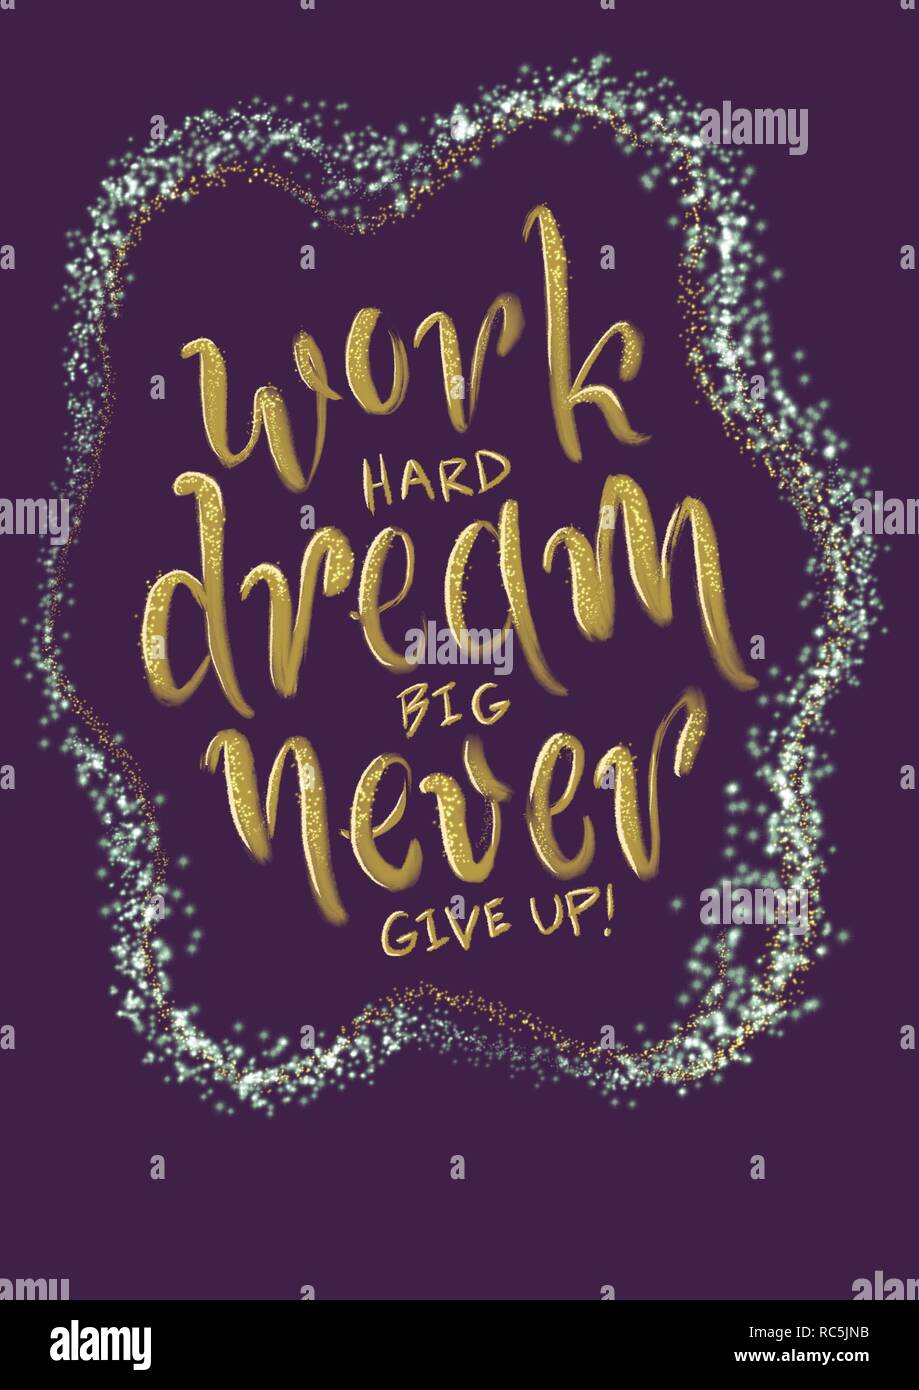 Work Hard Dream Big Never Give Up Saying Motivational Poster